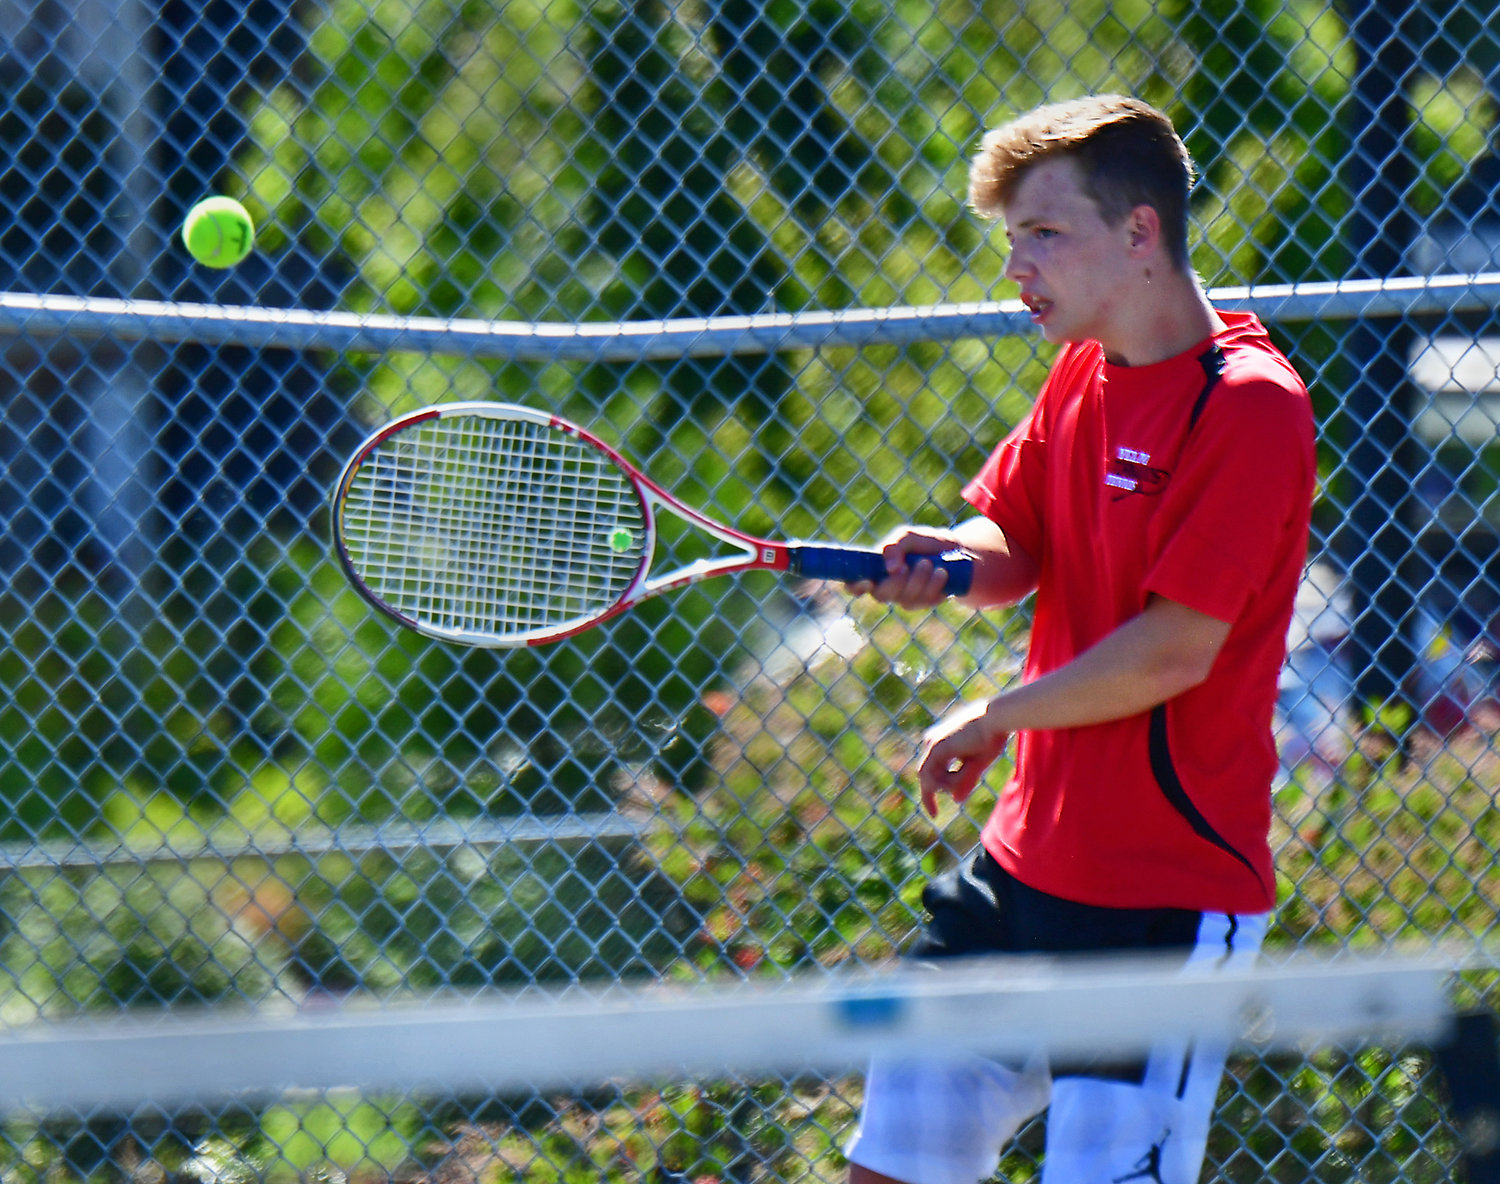 Thomas Smith, one-half of the Yelm High School No. 1 boys doubles tennis duo, lobs a serve back to his doubles opponents from River Ridge High School on Wednesday, June 2, in Lacey.